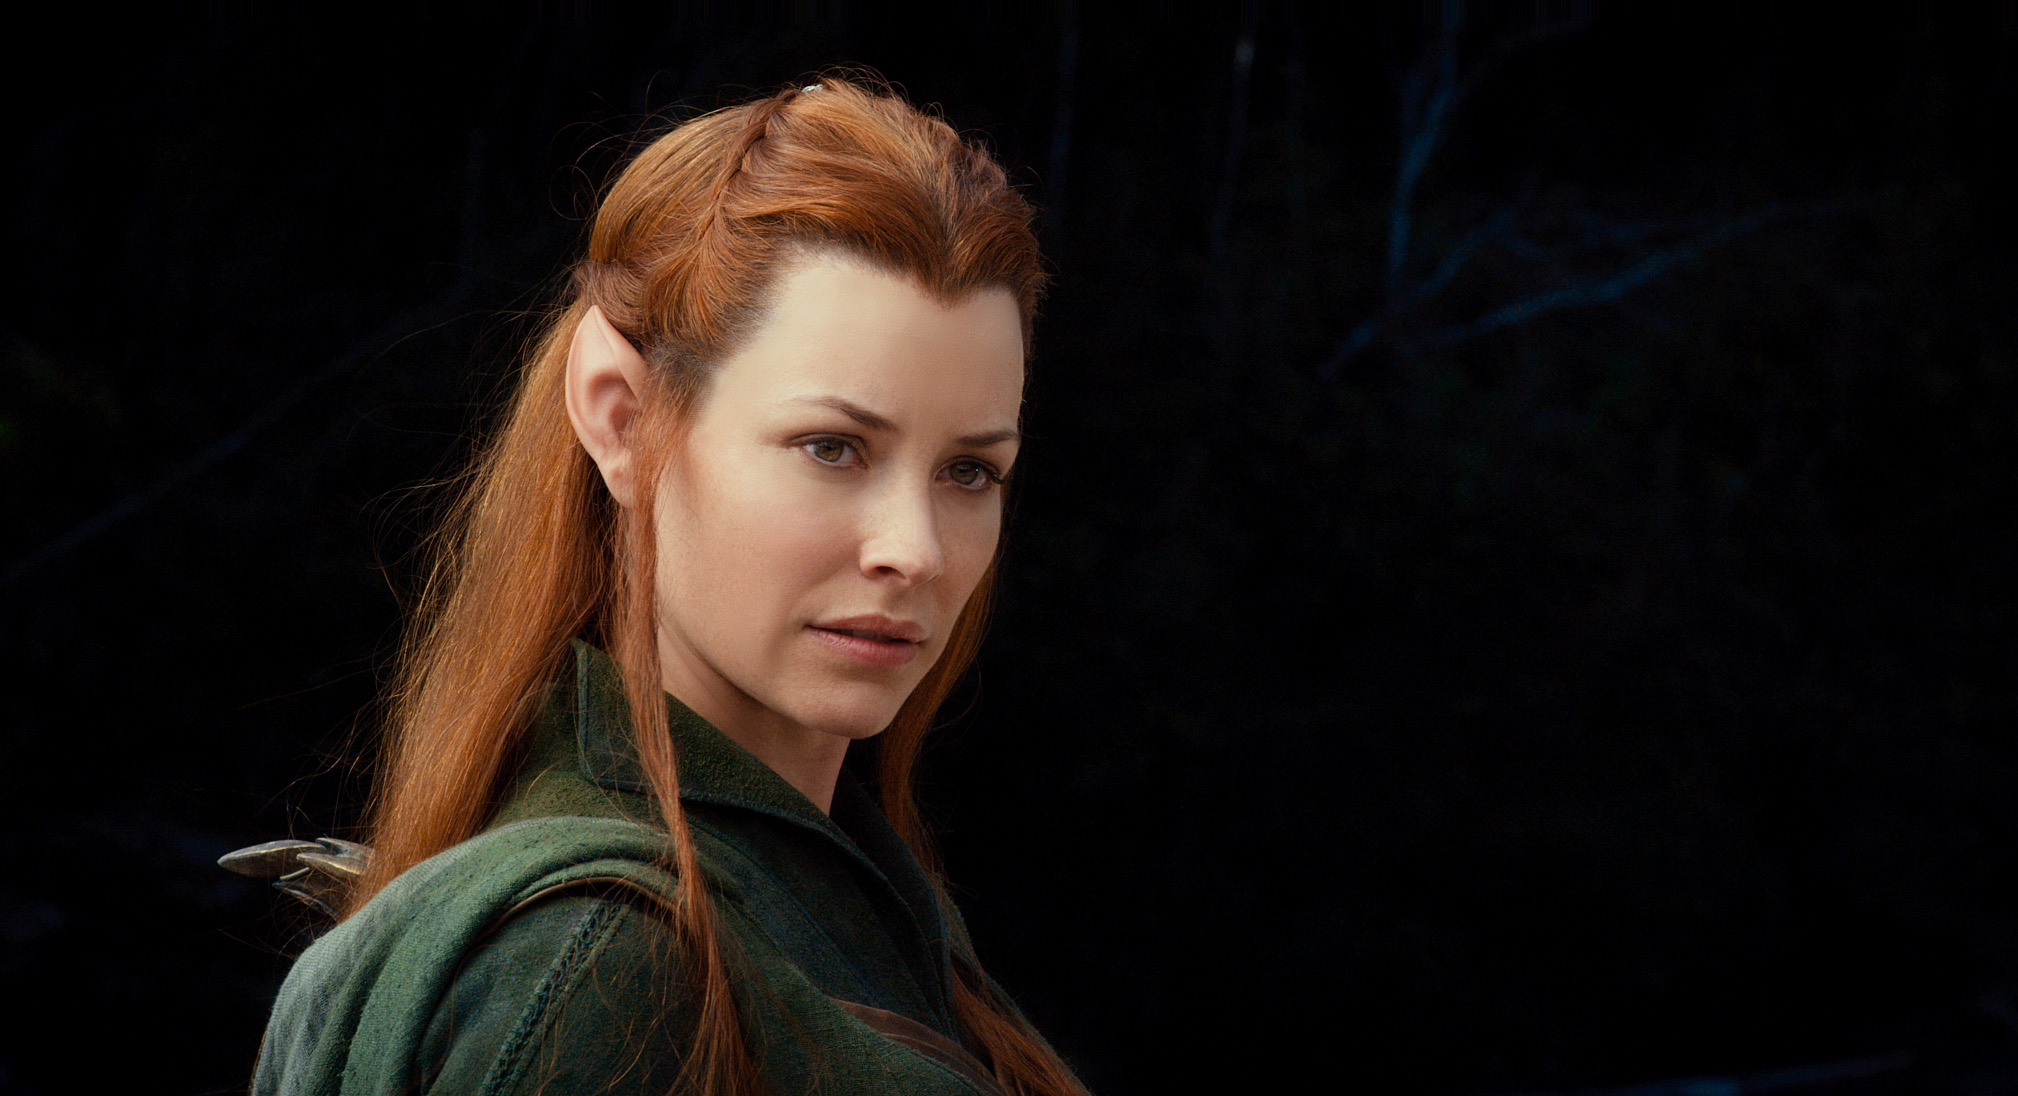 Elven Ears The Hobbit Tauriel The Hobbit The Desolation Of Smaug